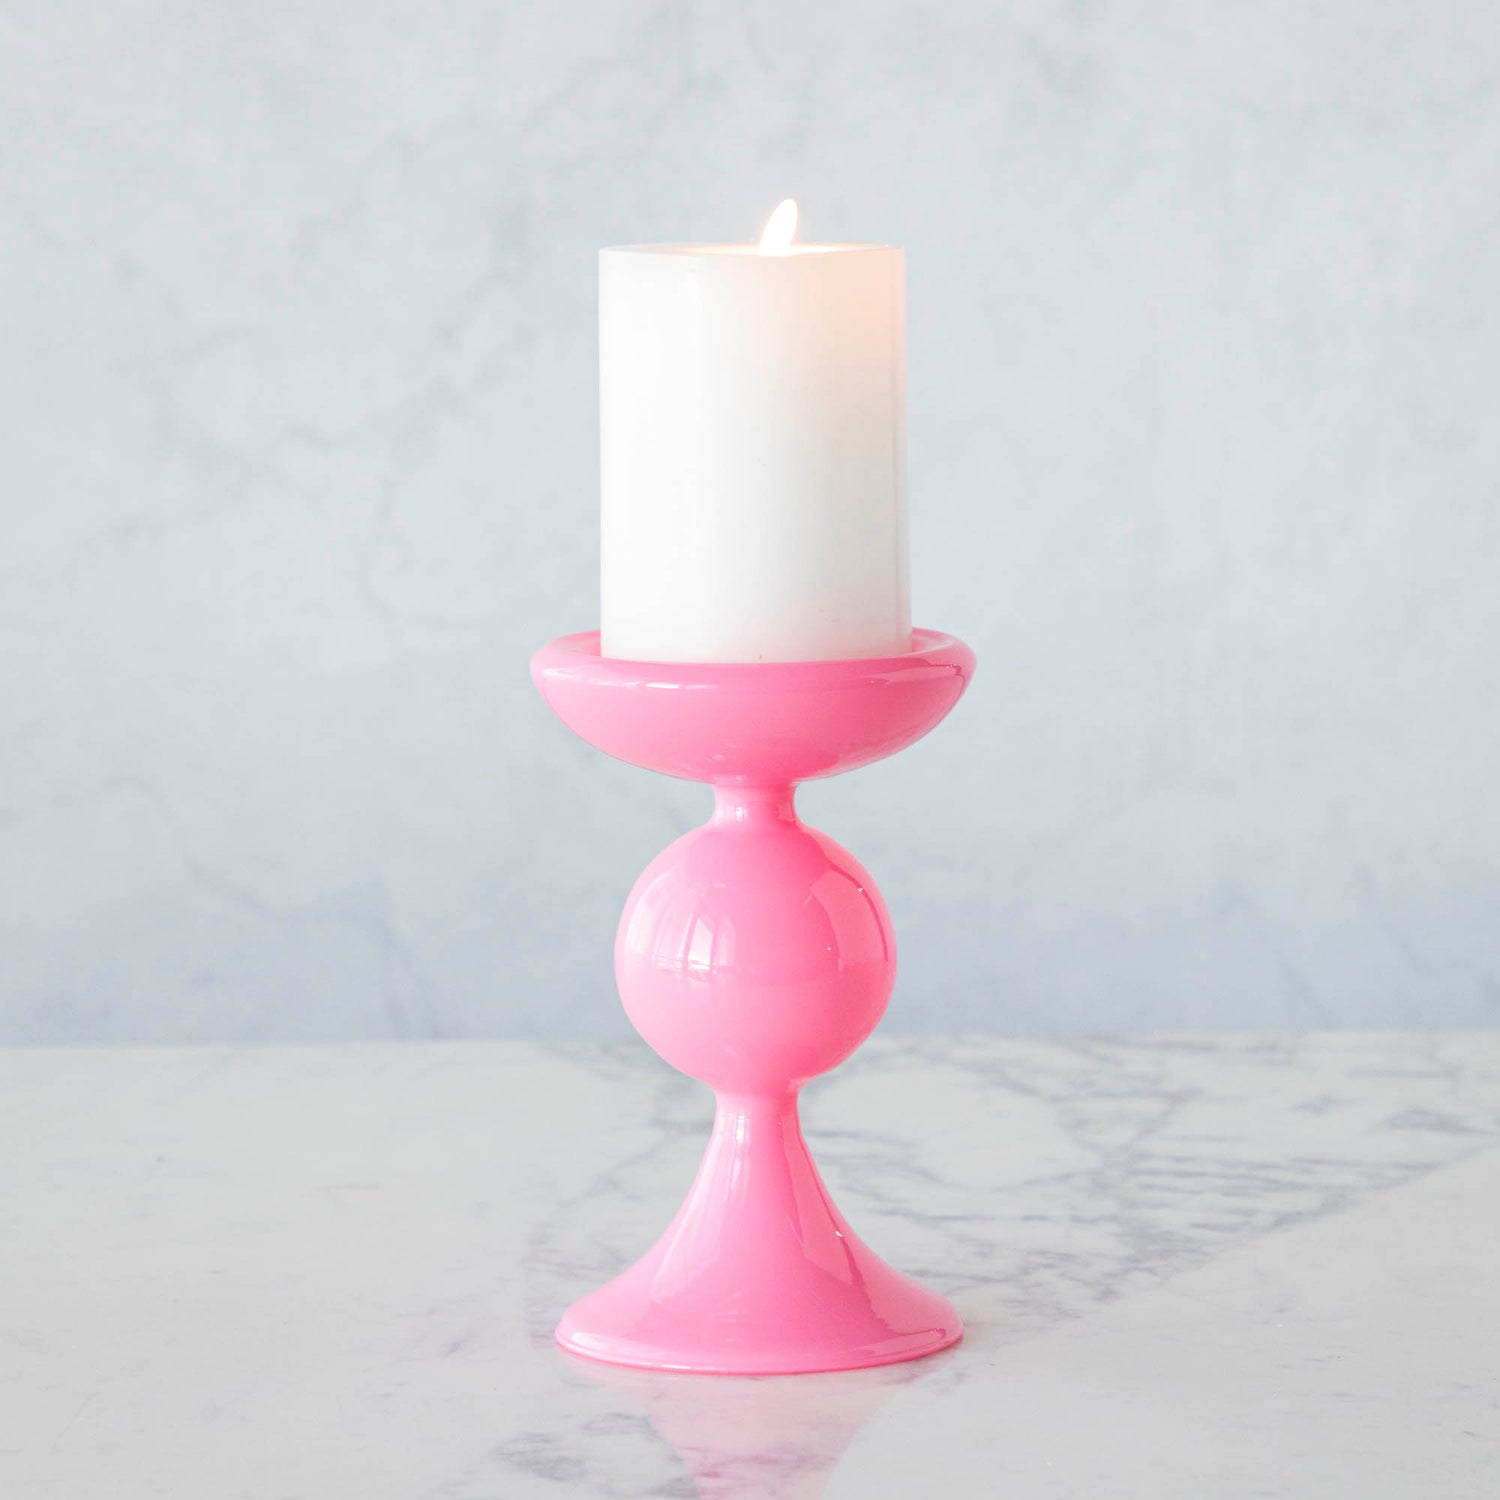 A group of Glitterville Sweet Bubble Pillar Candle Holders in vibrant colors with a candle in the middle.